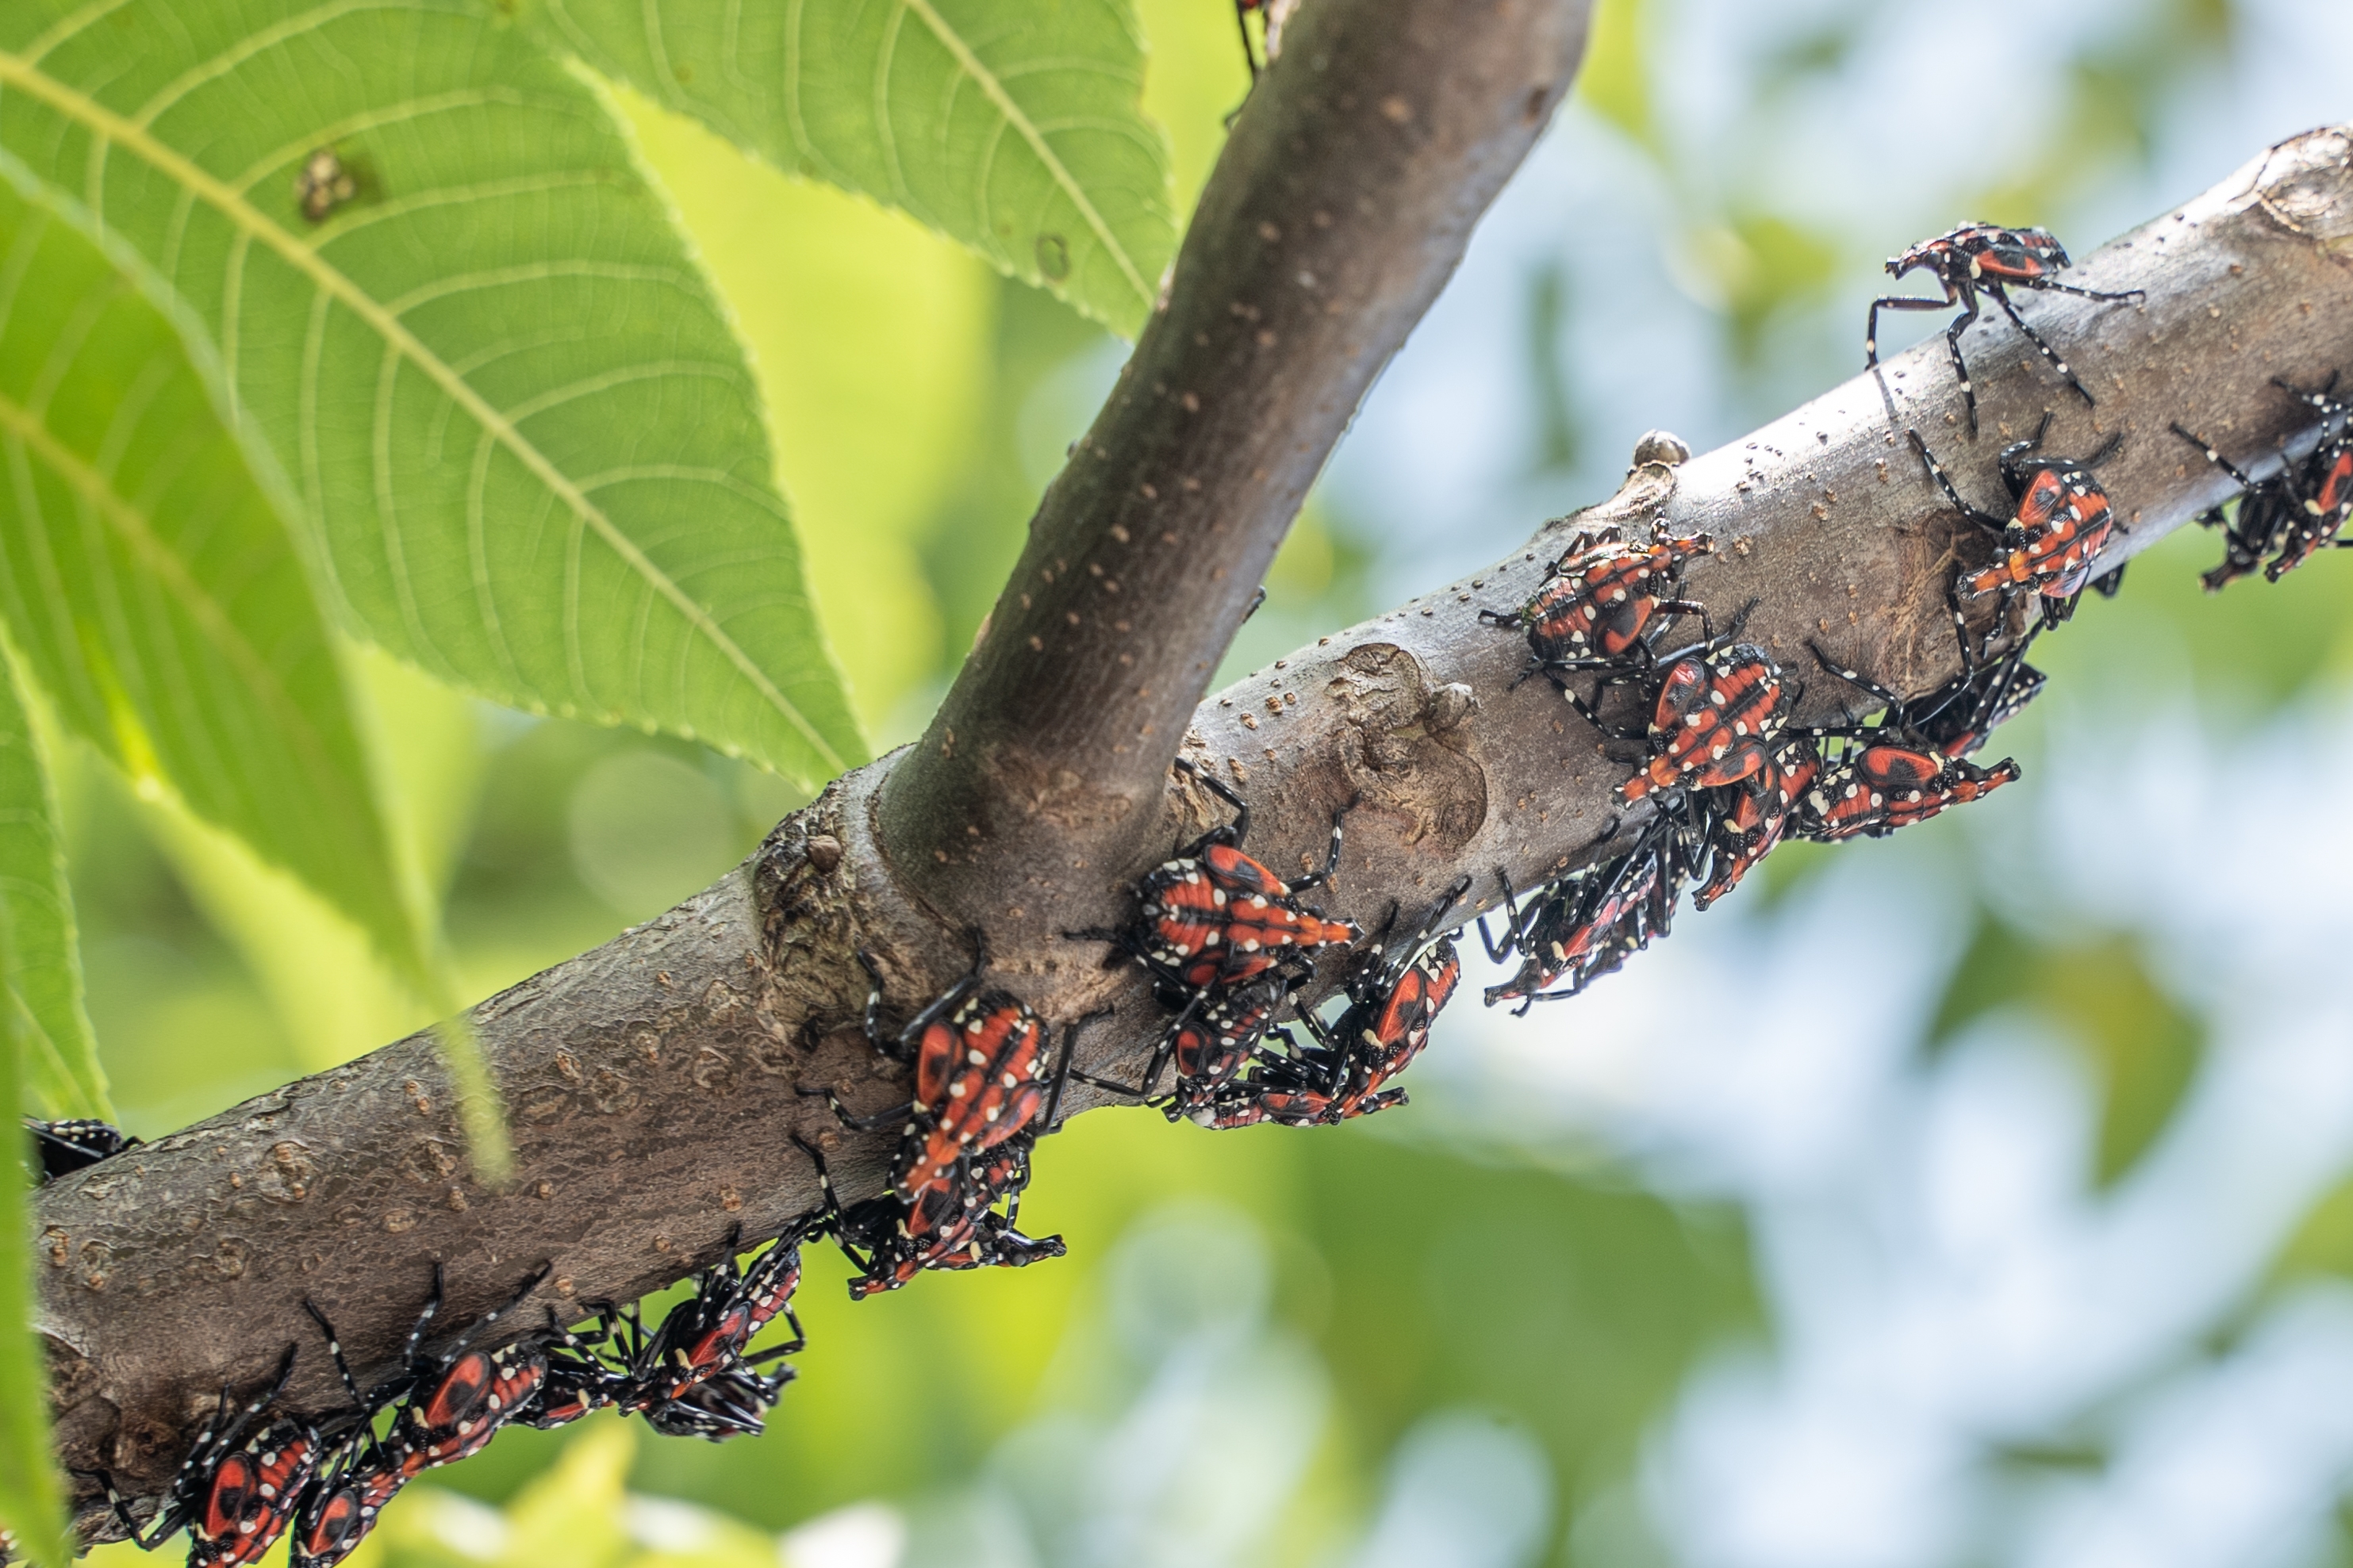 Stopping Spotted Lanternflies Early